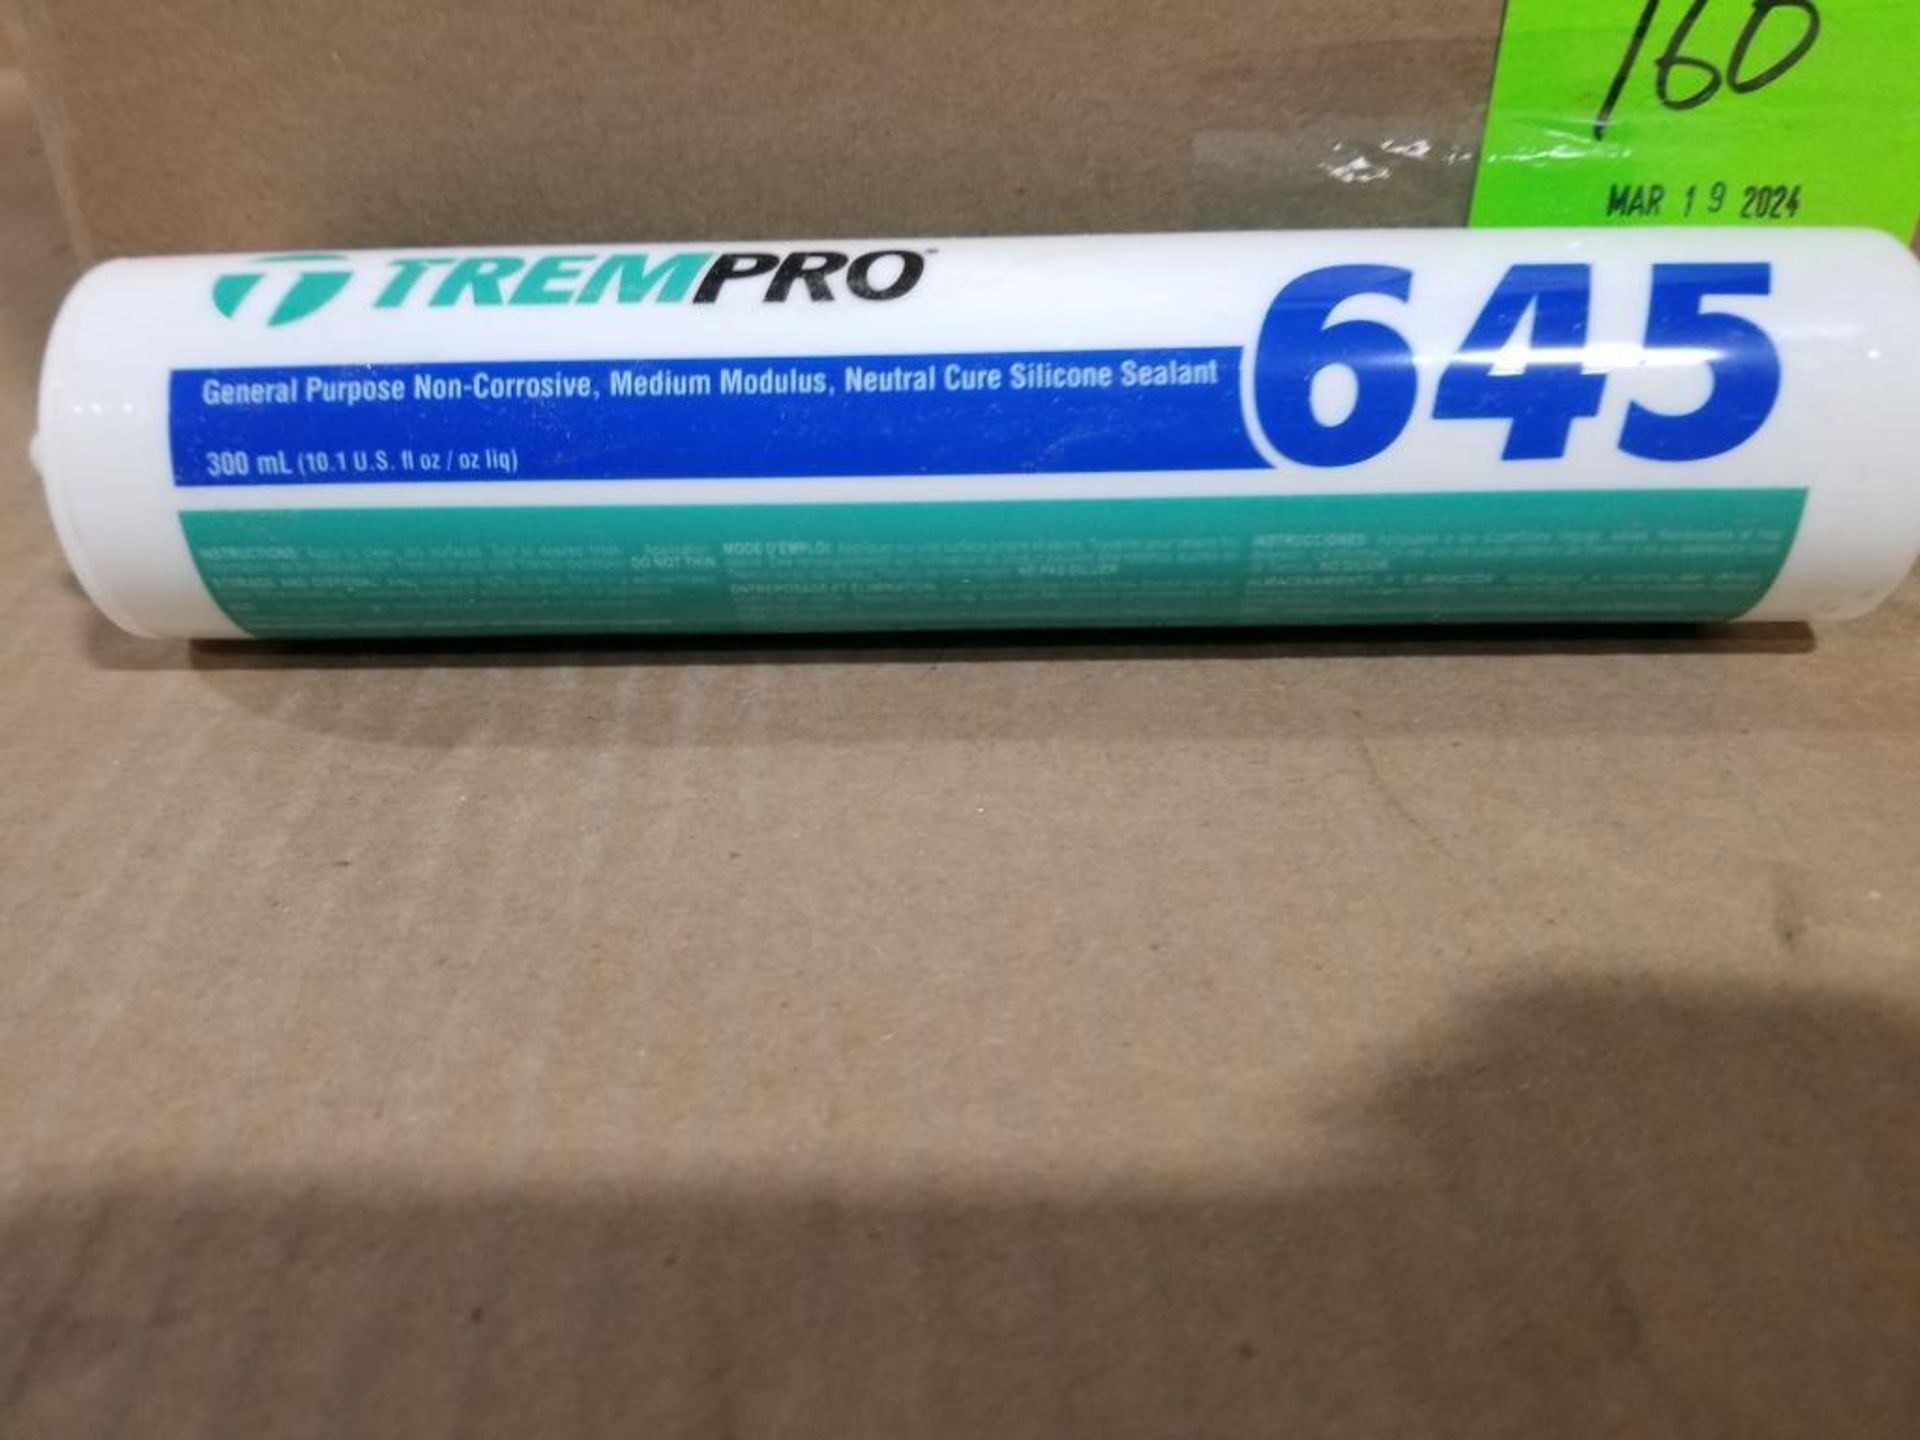 Qty 30 - TremPro 645 silicon sealant. - Image 4 of 5